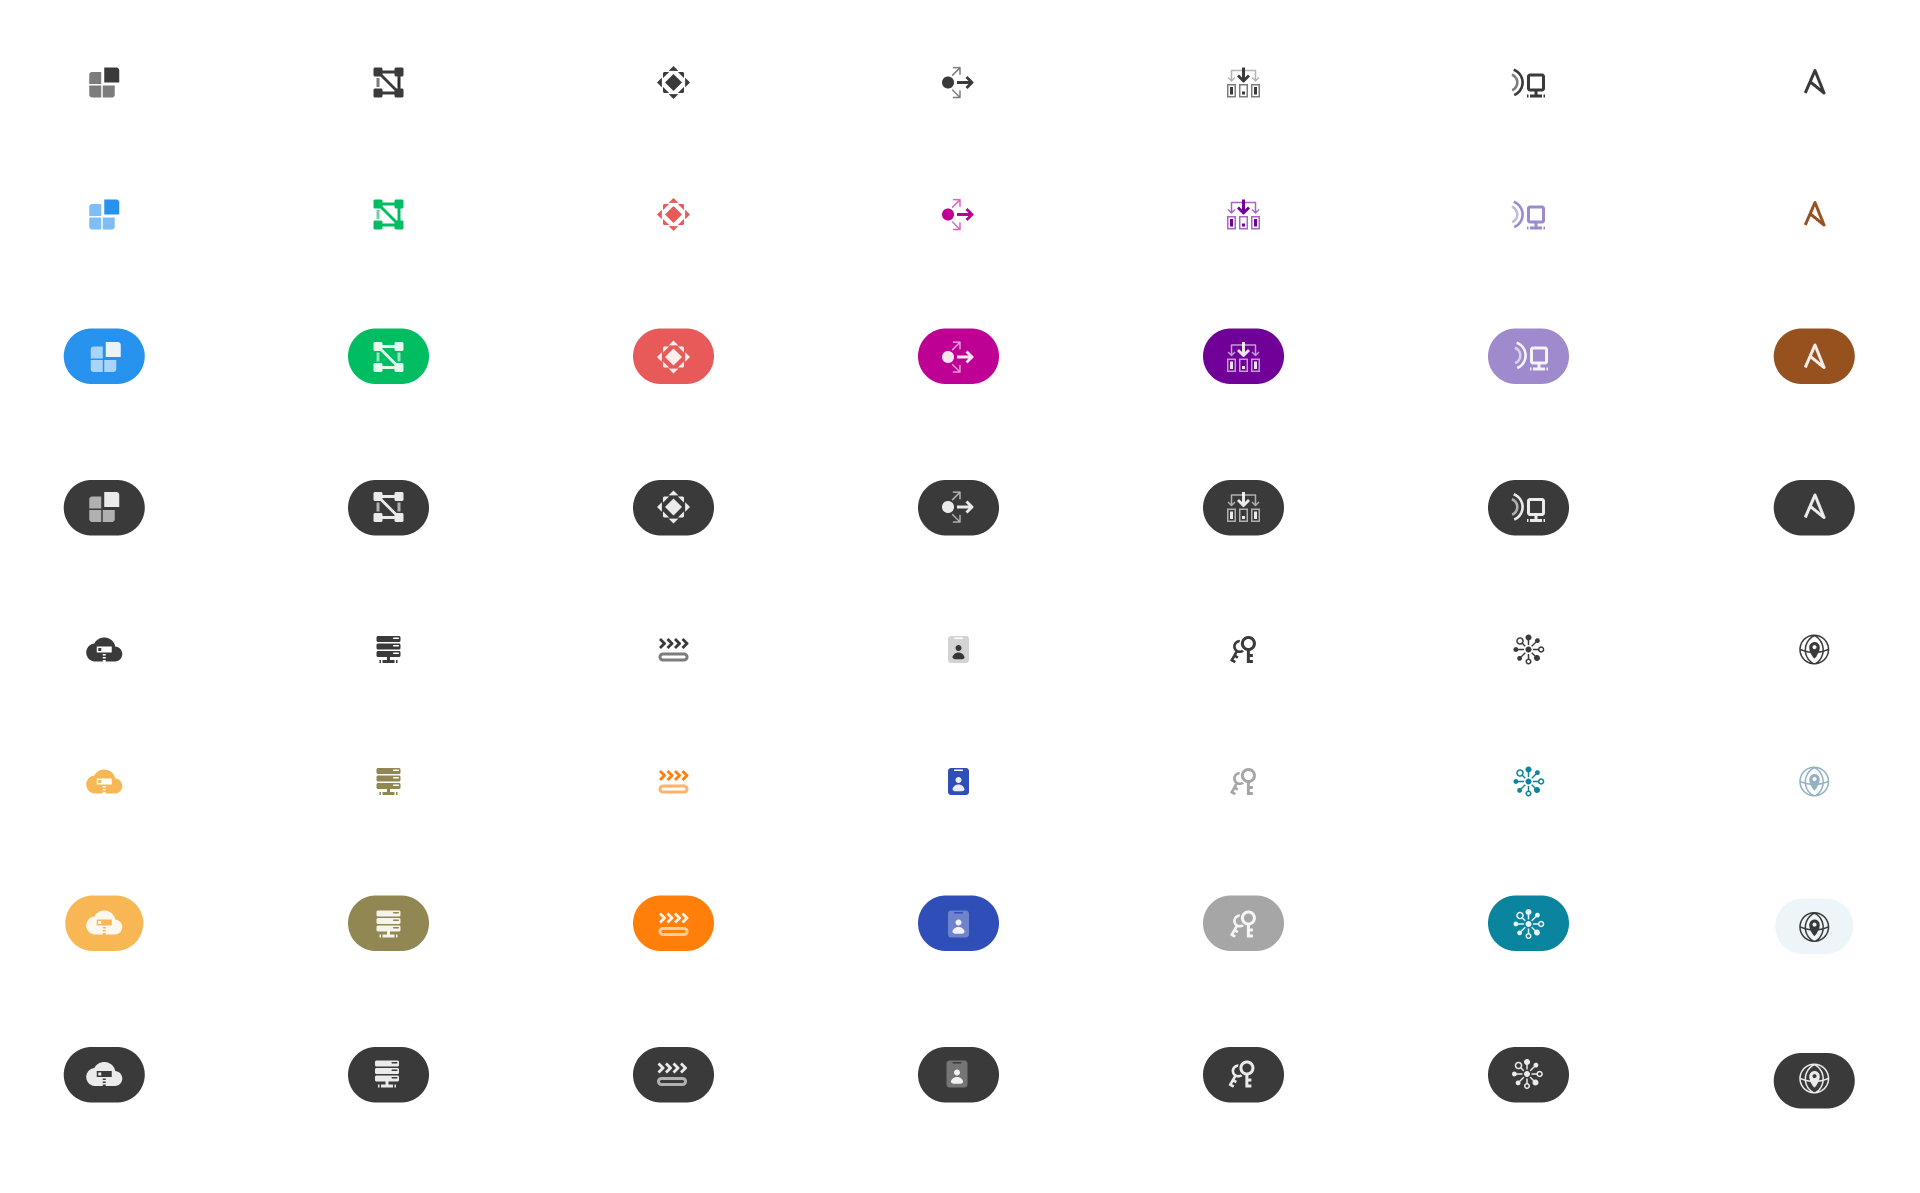 Several icons created for the C6 Bank design system for different infrastructure entities in several modes: only grays, colorful over white, colorful over black, and white over colorful backgrounds.